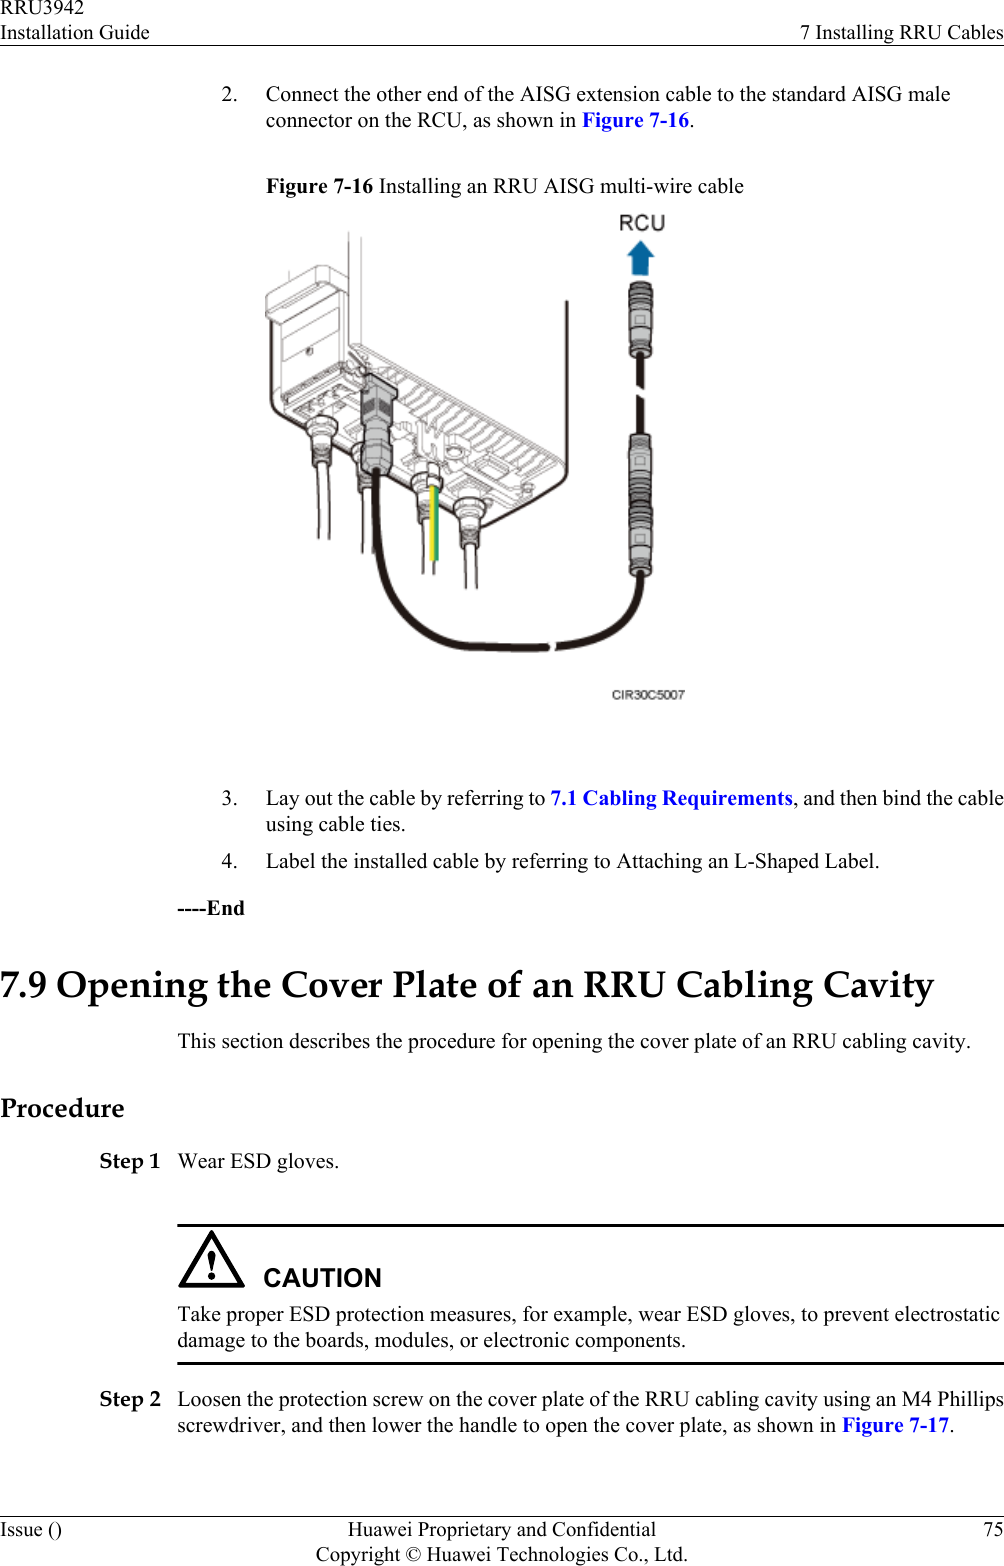 2. Connect the other end of the AISG extension cable to the standard AISG maleconnector on the RCU, as shown in Figure 7-16.Figure 7-16 Installing an RRU AISG multi-wire cable 3. Lay out the cable by referring to 7.1 Cabling Requirements, and then bind the cableusing cable ties.4. Label the installed cable by referring to Attaching an L-Shaped Label.----End7.9 Opening the Cover Plate of an RRU Cabling CavityThis section describes the procedure for opening the cover plate of an RRU cabling cavity.ProcedureStep 1 Wear ESD gloves.CAUTIONTake proper ESD protection measures, for example, wear ESD gloves, to prevent electrostaticdamage to the boards, modules, or electronic components.Step 2 Loosen the protection screw on the cover plate of the RRU cabling cavity using an M4 Phillipsscrewdriver, and then lower the handle to open the cover plate, as shown in Figure 7-17.RRU3942Installation Guide 7 Installing RRU CablesIssue () Huawei Proprietary and ConfidentialCopyright © Huawei Technologies Co., Ltd.75